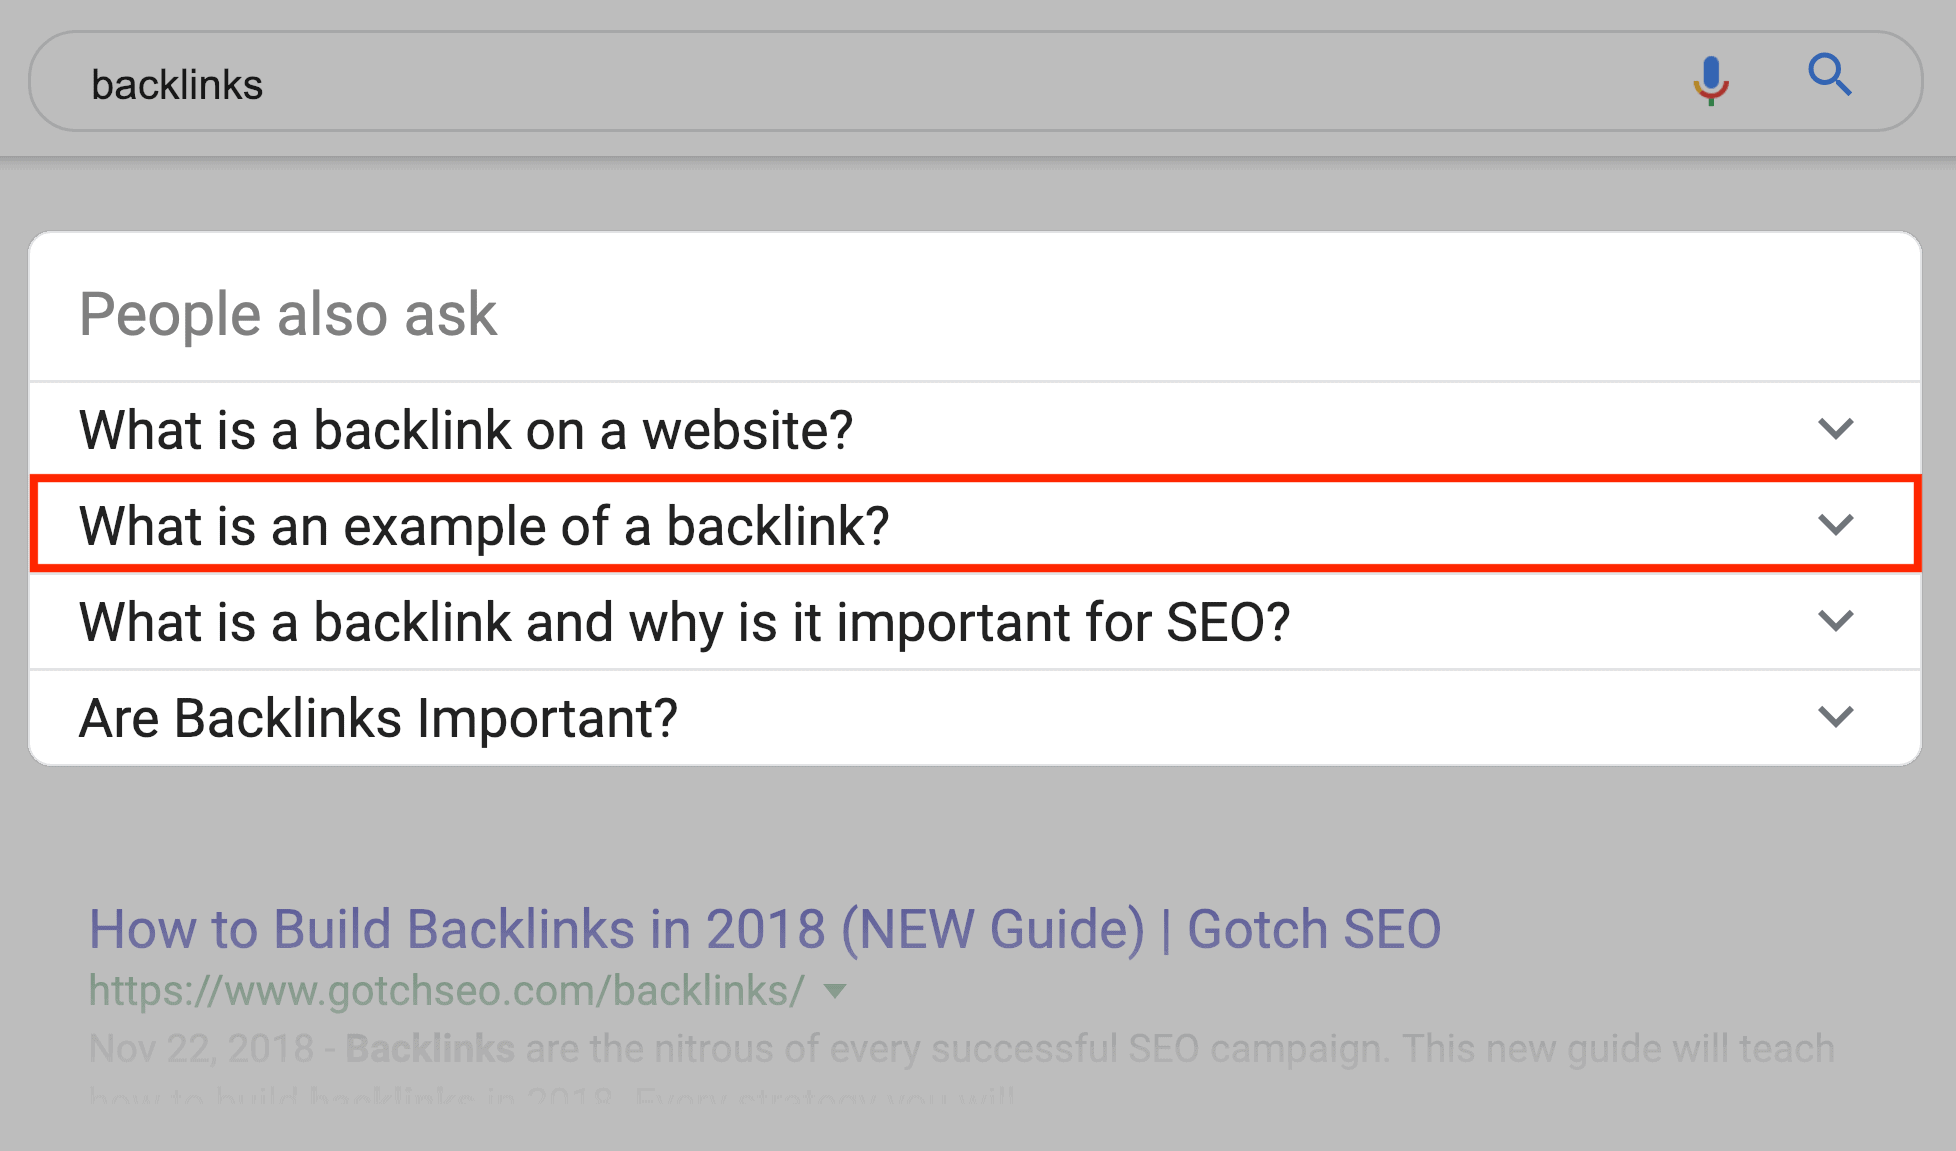 "backlinks" SERPs – "People also ask" section